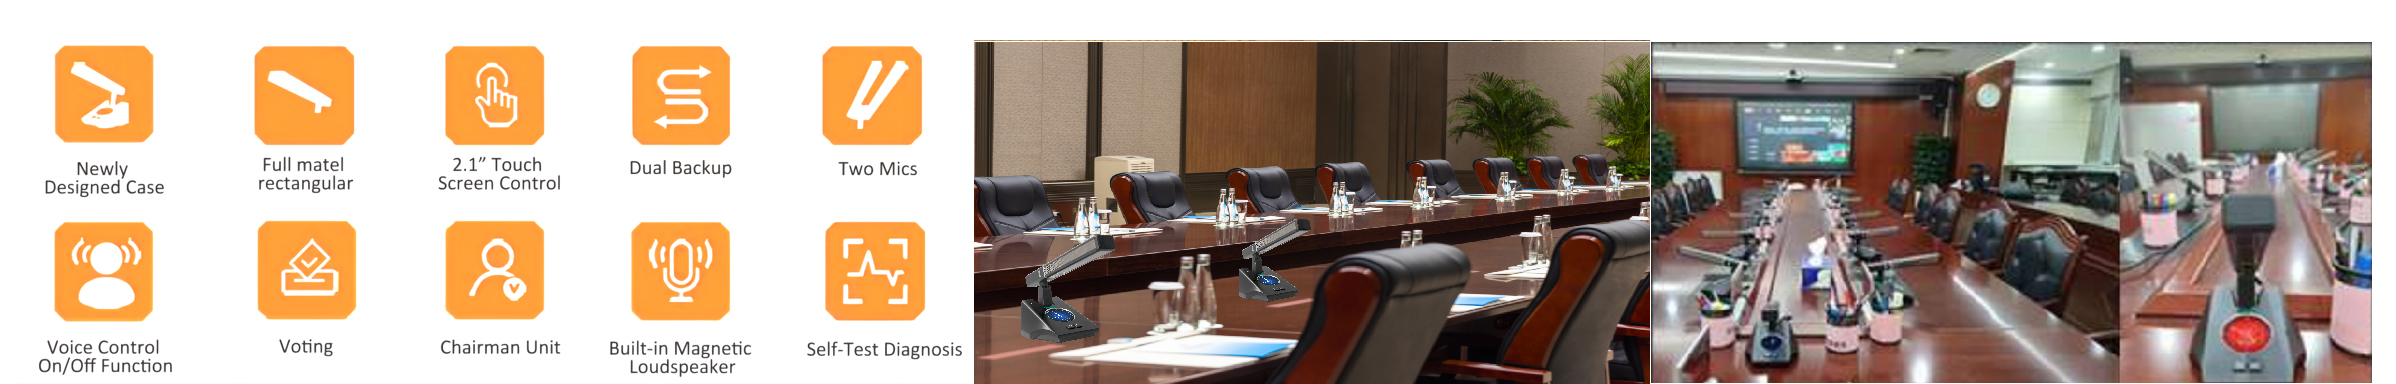 professional-sound-system-solution-for-medium-sized-conference-room-1.jpg